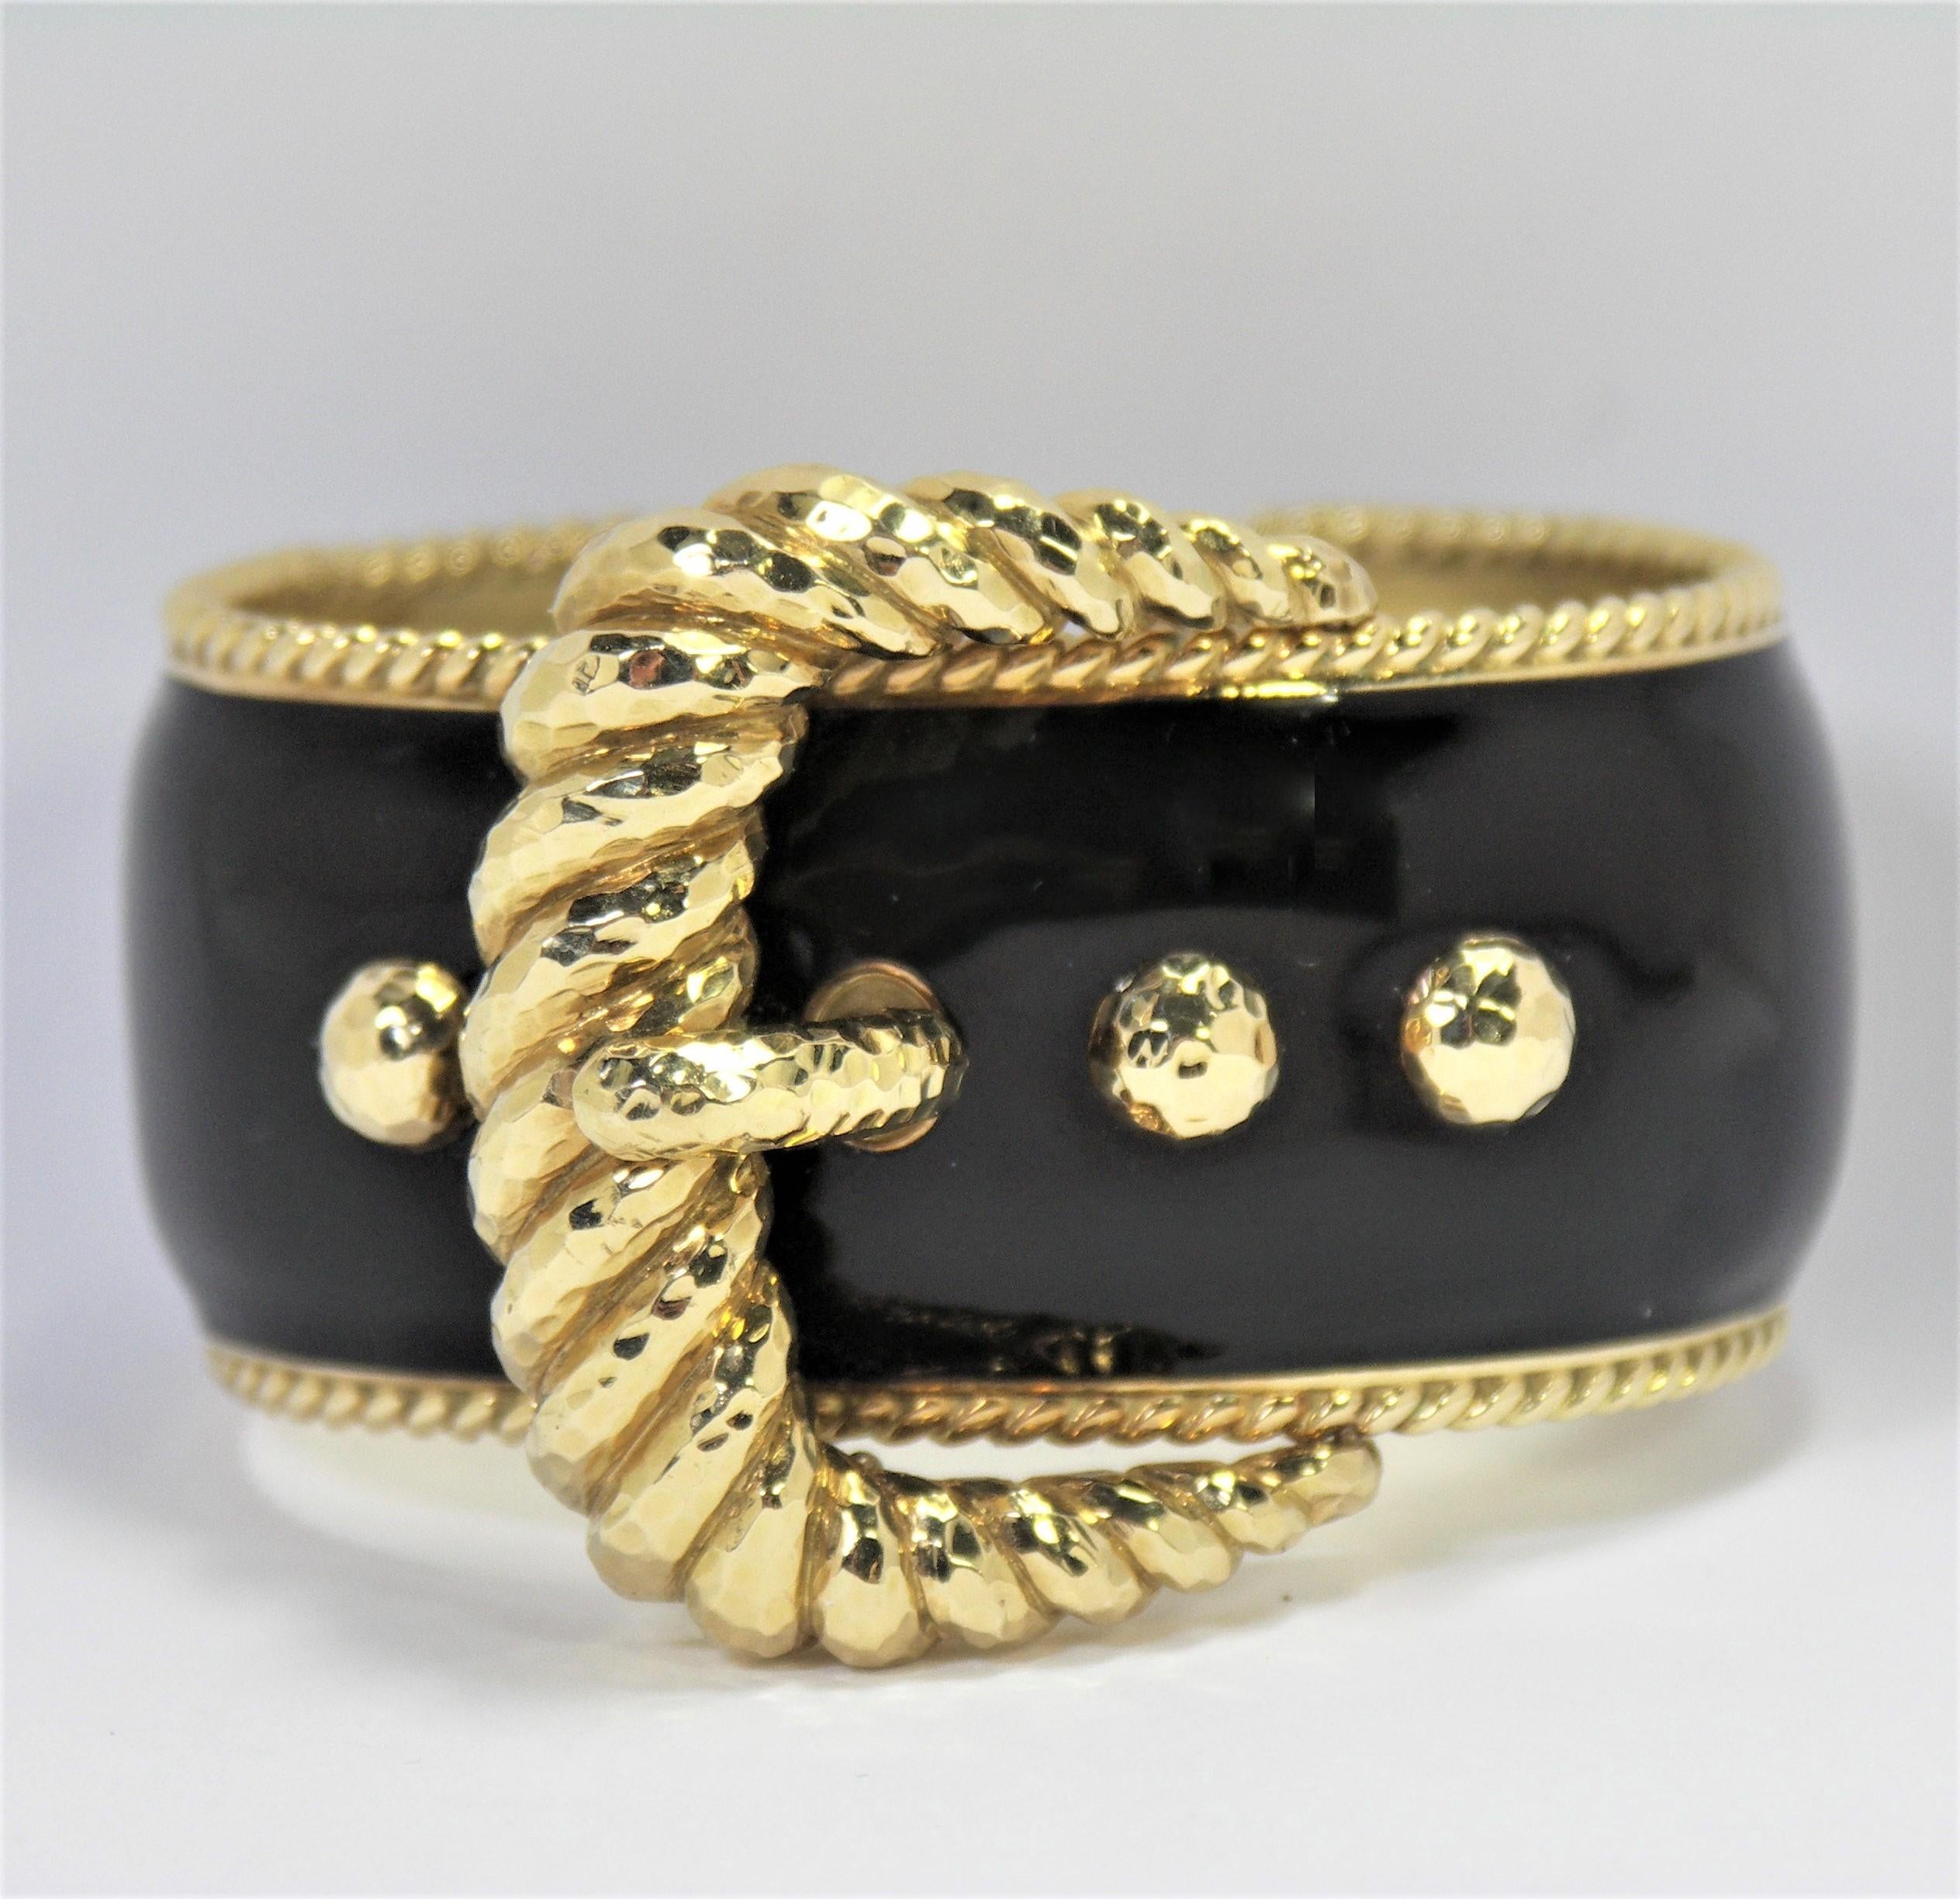 Made of 18K Yellow Gold with black enamel. this stylish bangle measures 1 3/4 inch at
the widest part of the buckle. A great addition to any David Webb collection. The locking 
hinge makes it easy to put on and to take off. Fits a small to medium